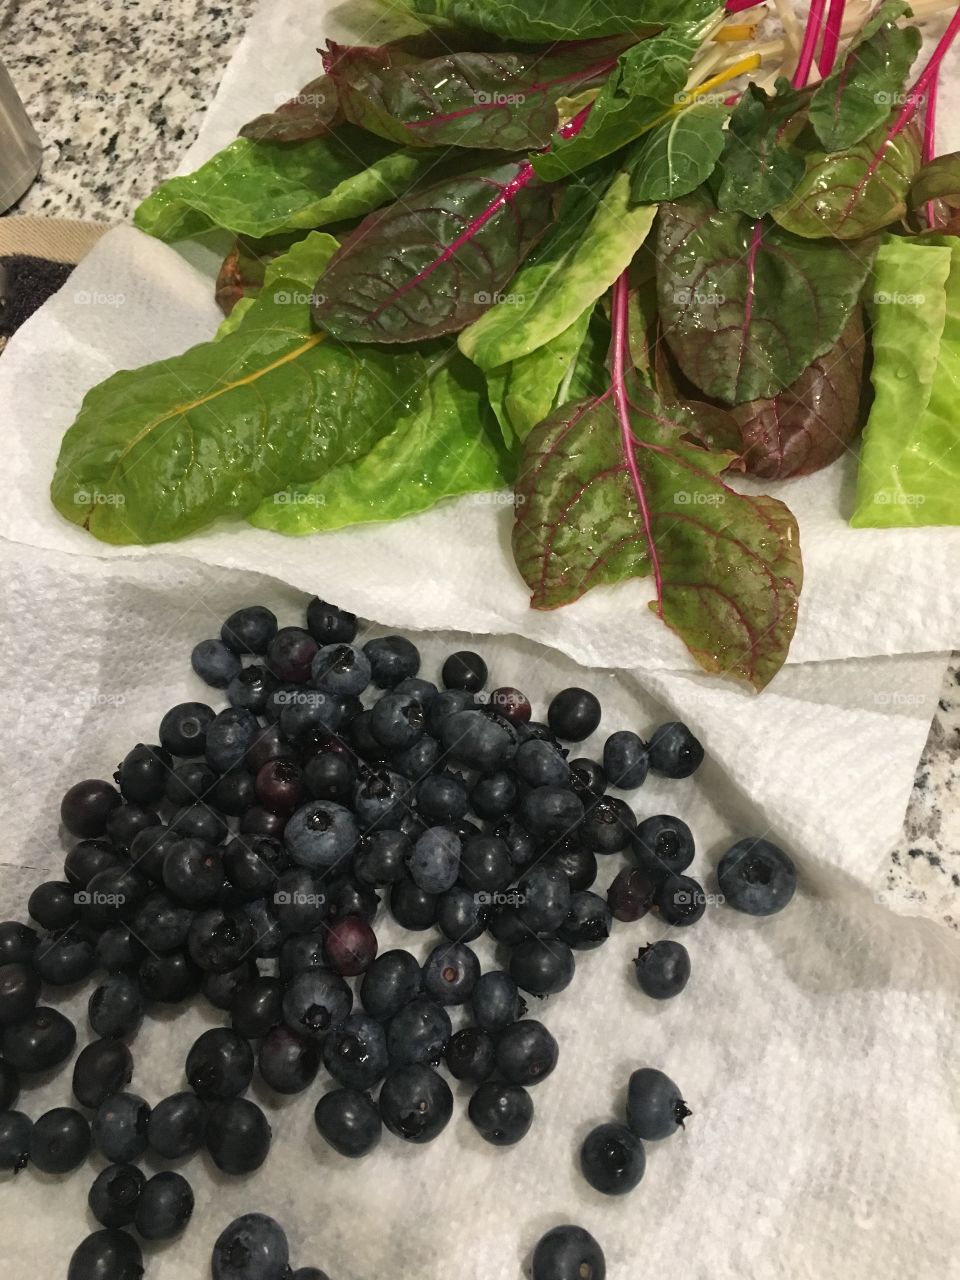 Freshly Washed Locally Grown Swiss Chard and Blueberries 